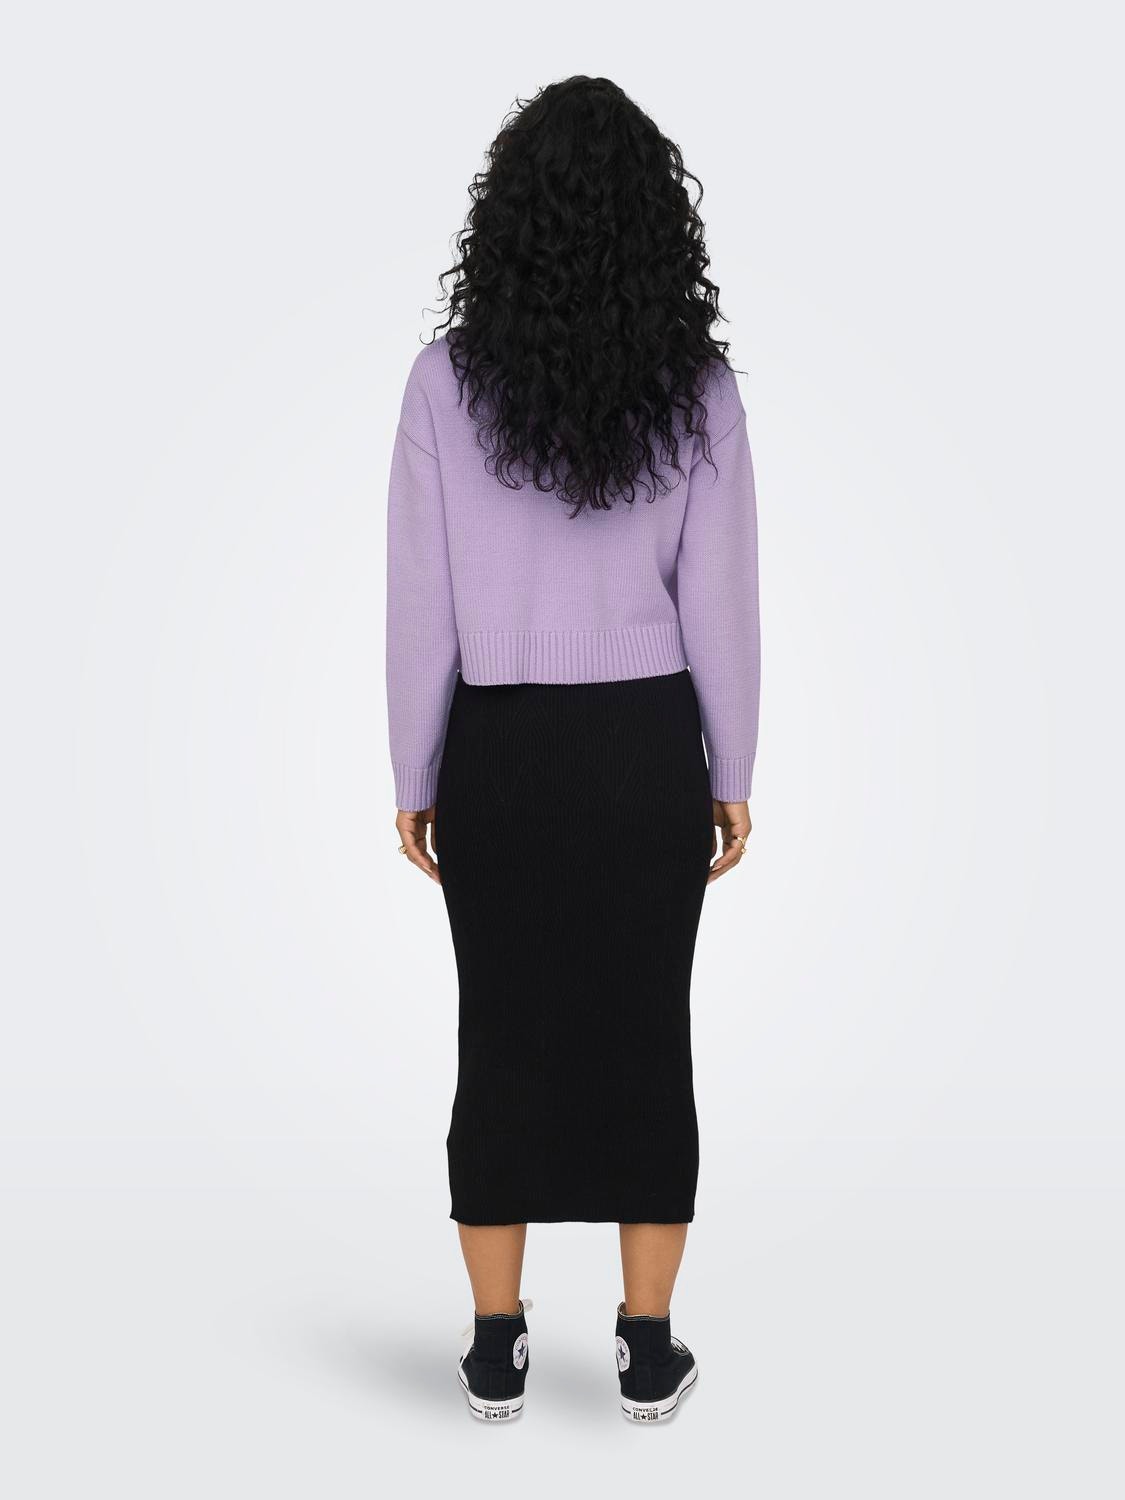 ONLY O-neck knitted pullover -Lavendula - 15301511